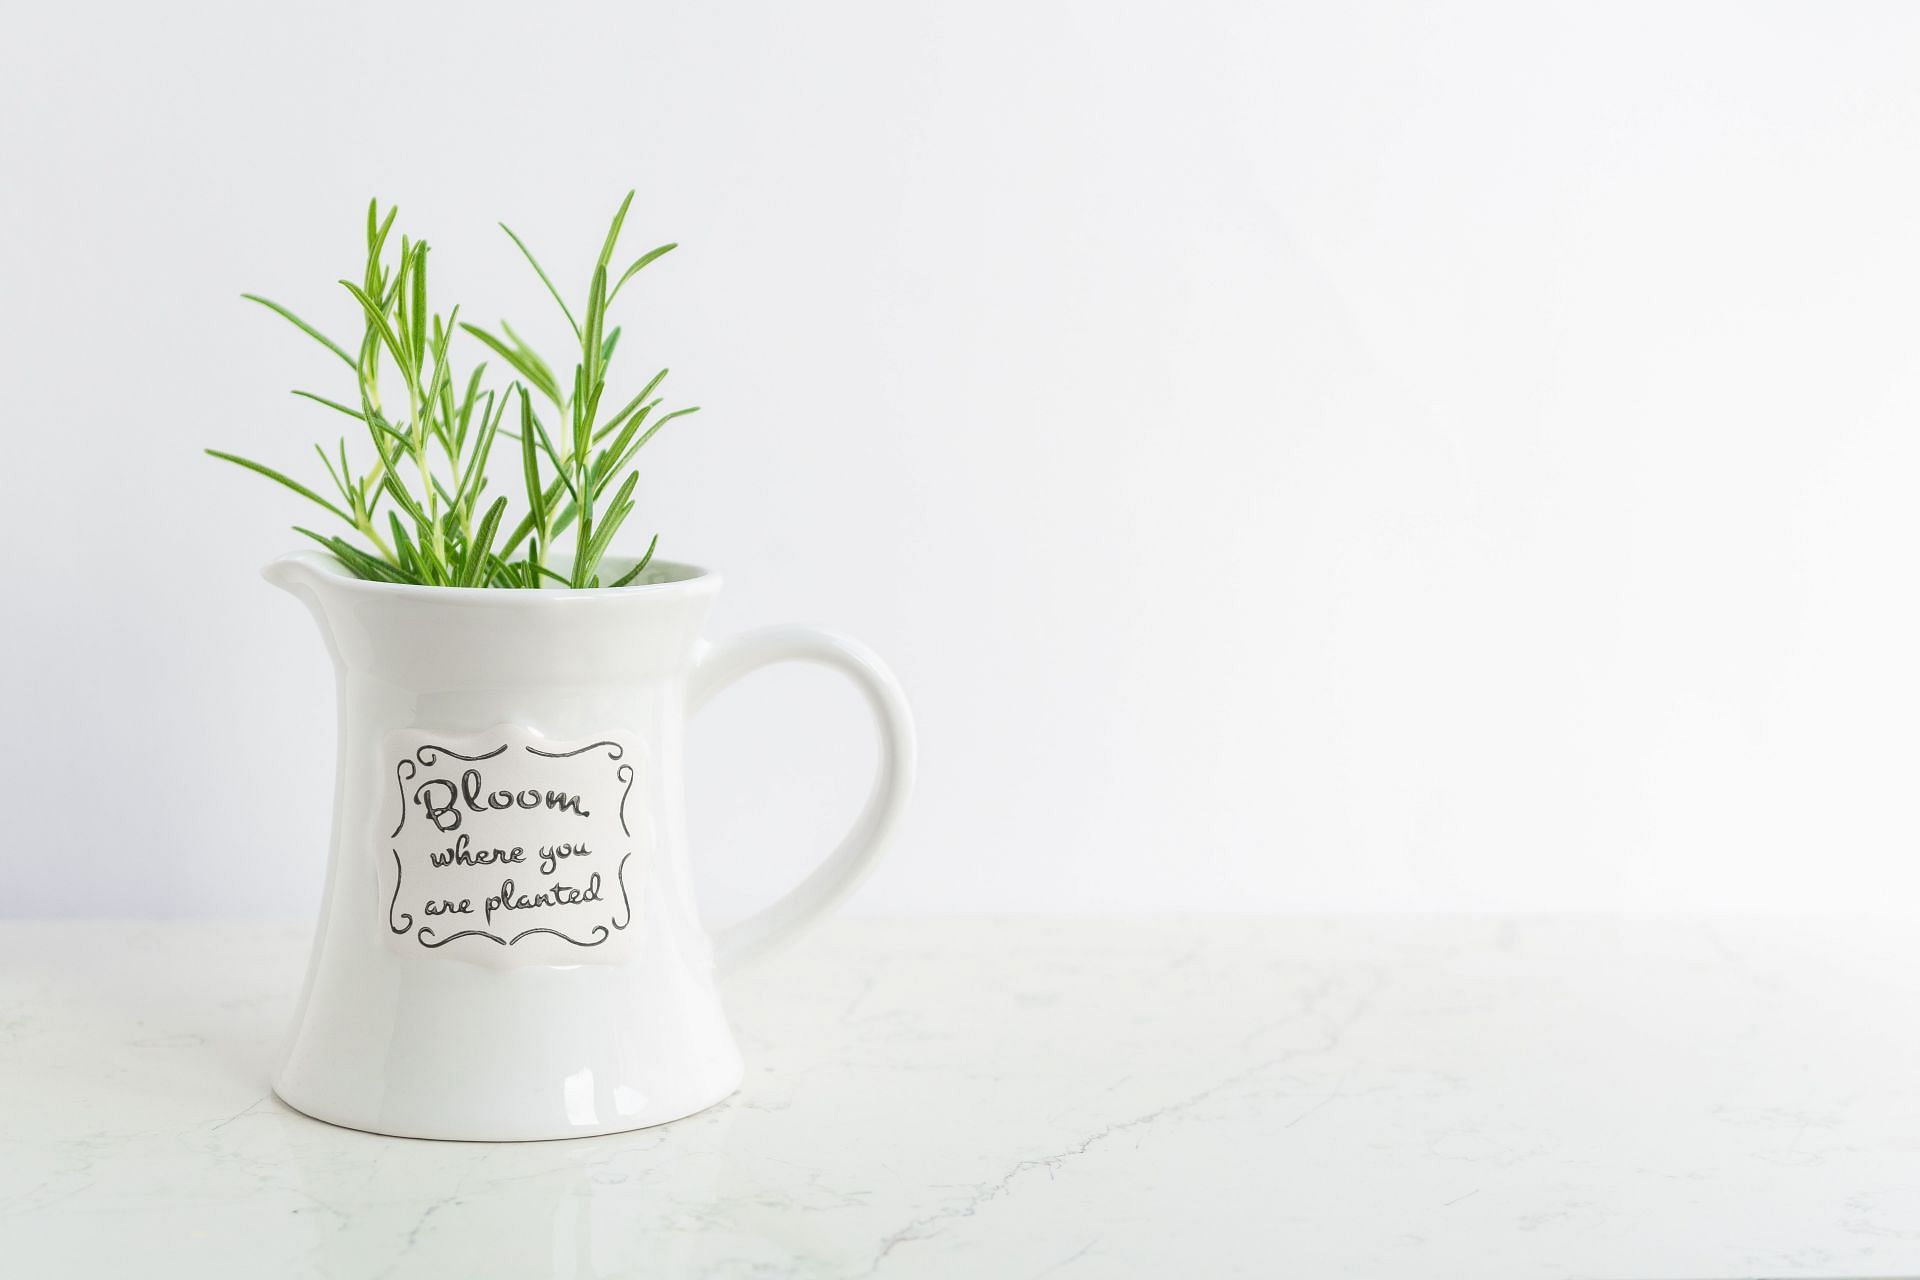 Medicinal uses of rosemary can come handy in your everyday life. (Image via Unsplash/ Paula Brustur)